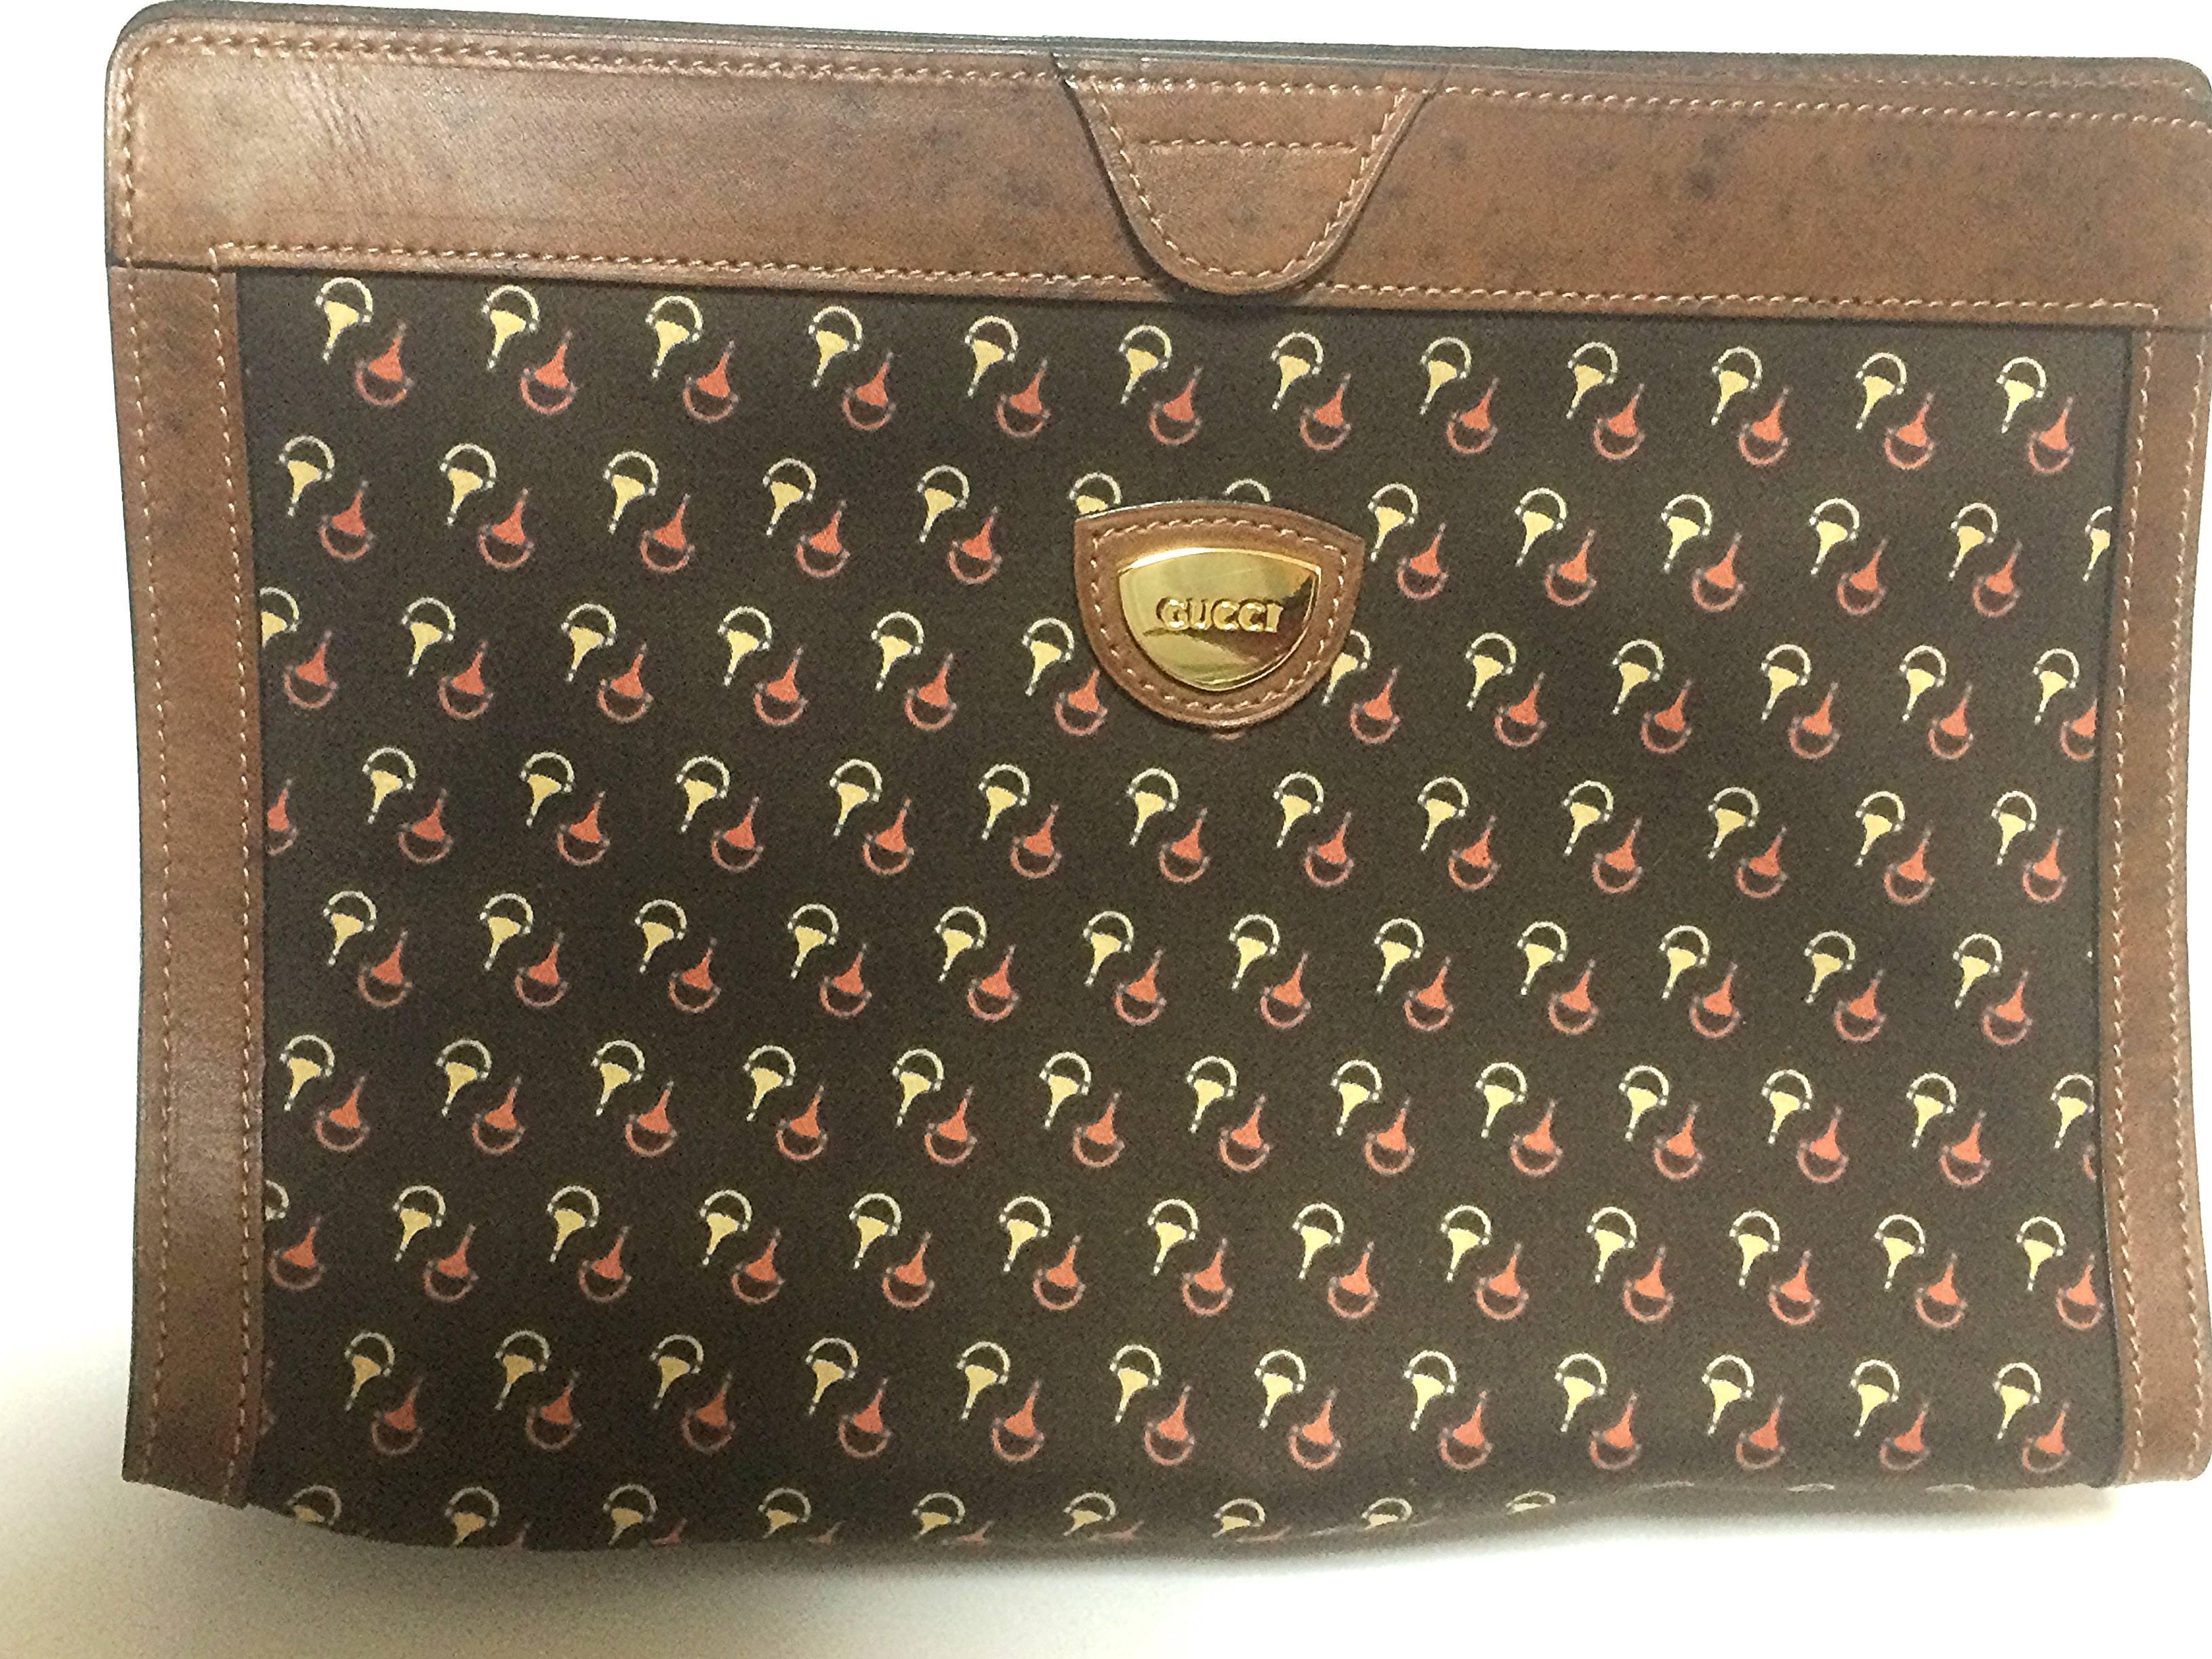 1980s. Vintage Gucci brown toiletry clutch pouch with all over horsebit print canvas with leather trimming.

Introducing one of the rarest vintage Gucci items from 80s.
Clutch cosmetic/toiletry use purse with print canvas and leather